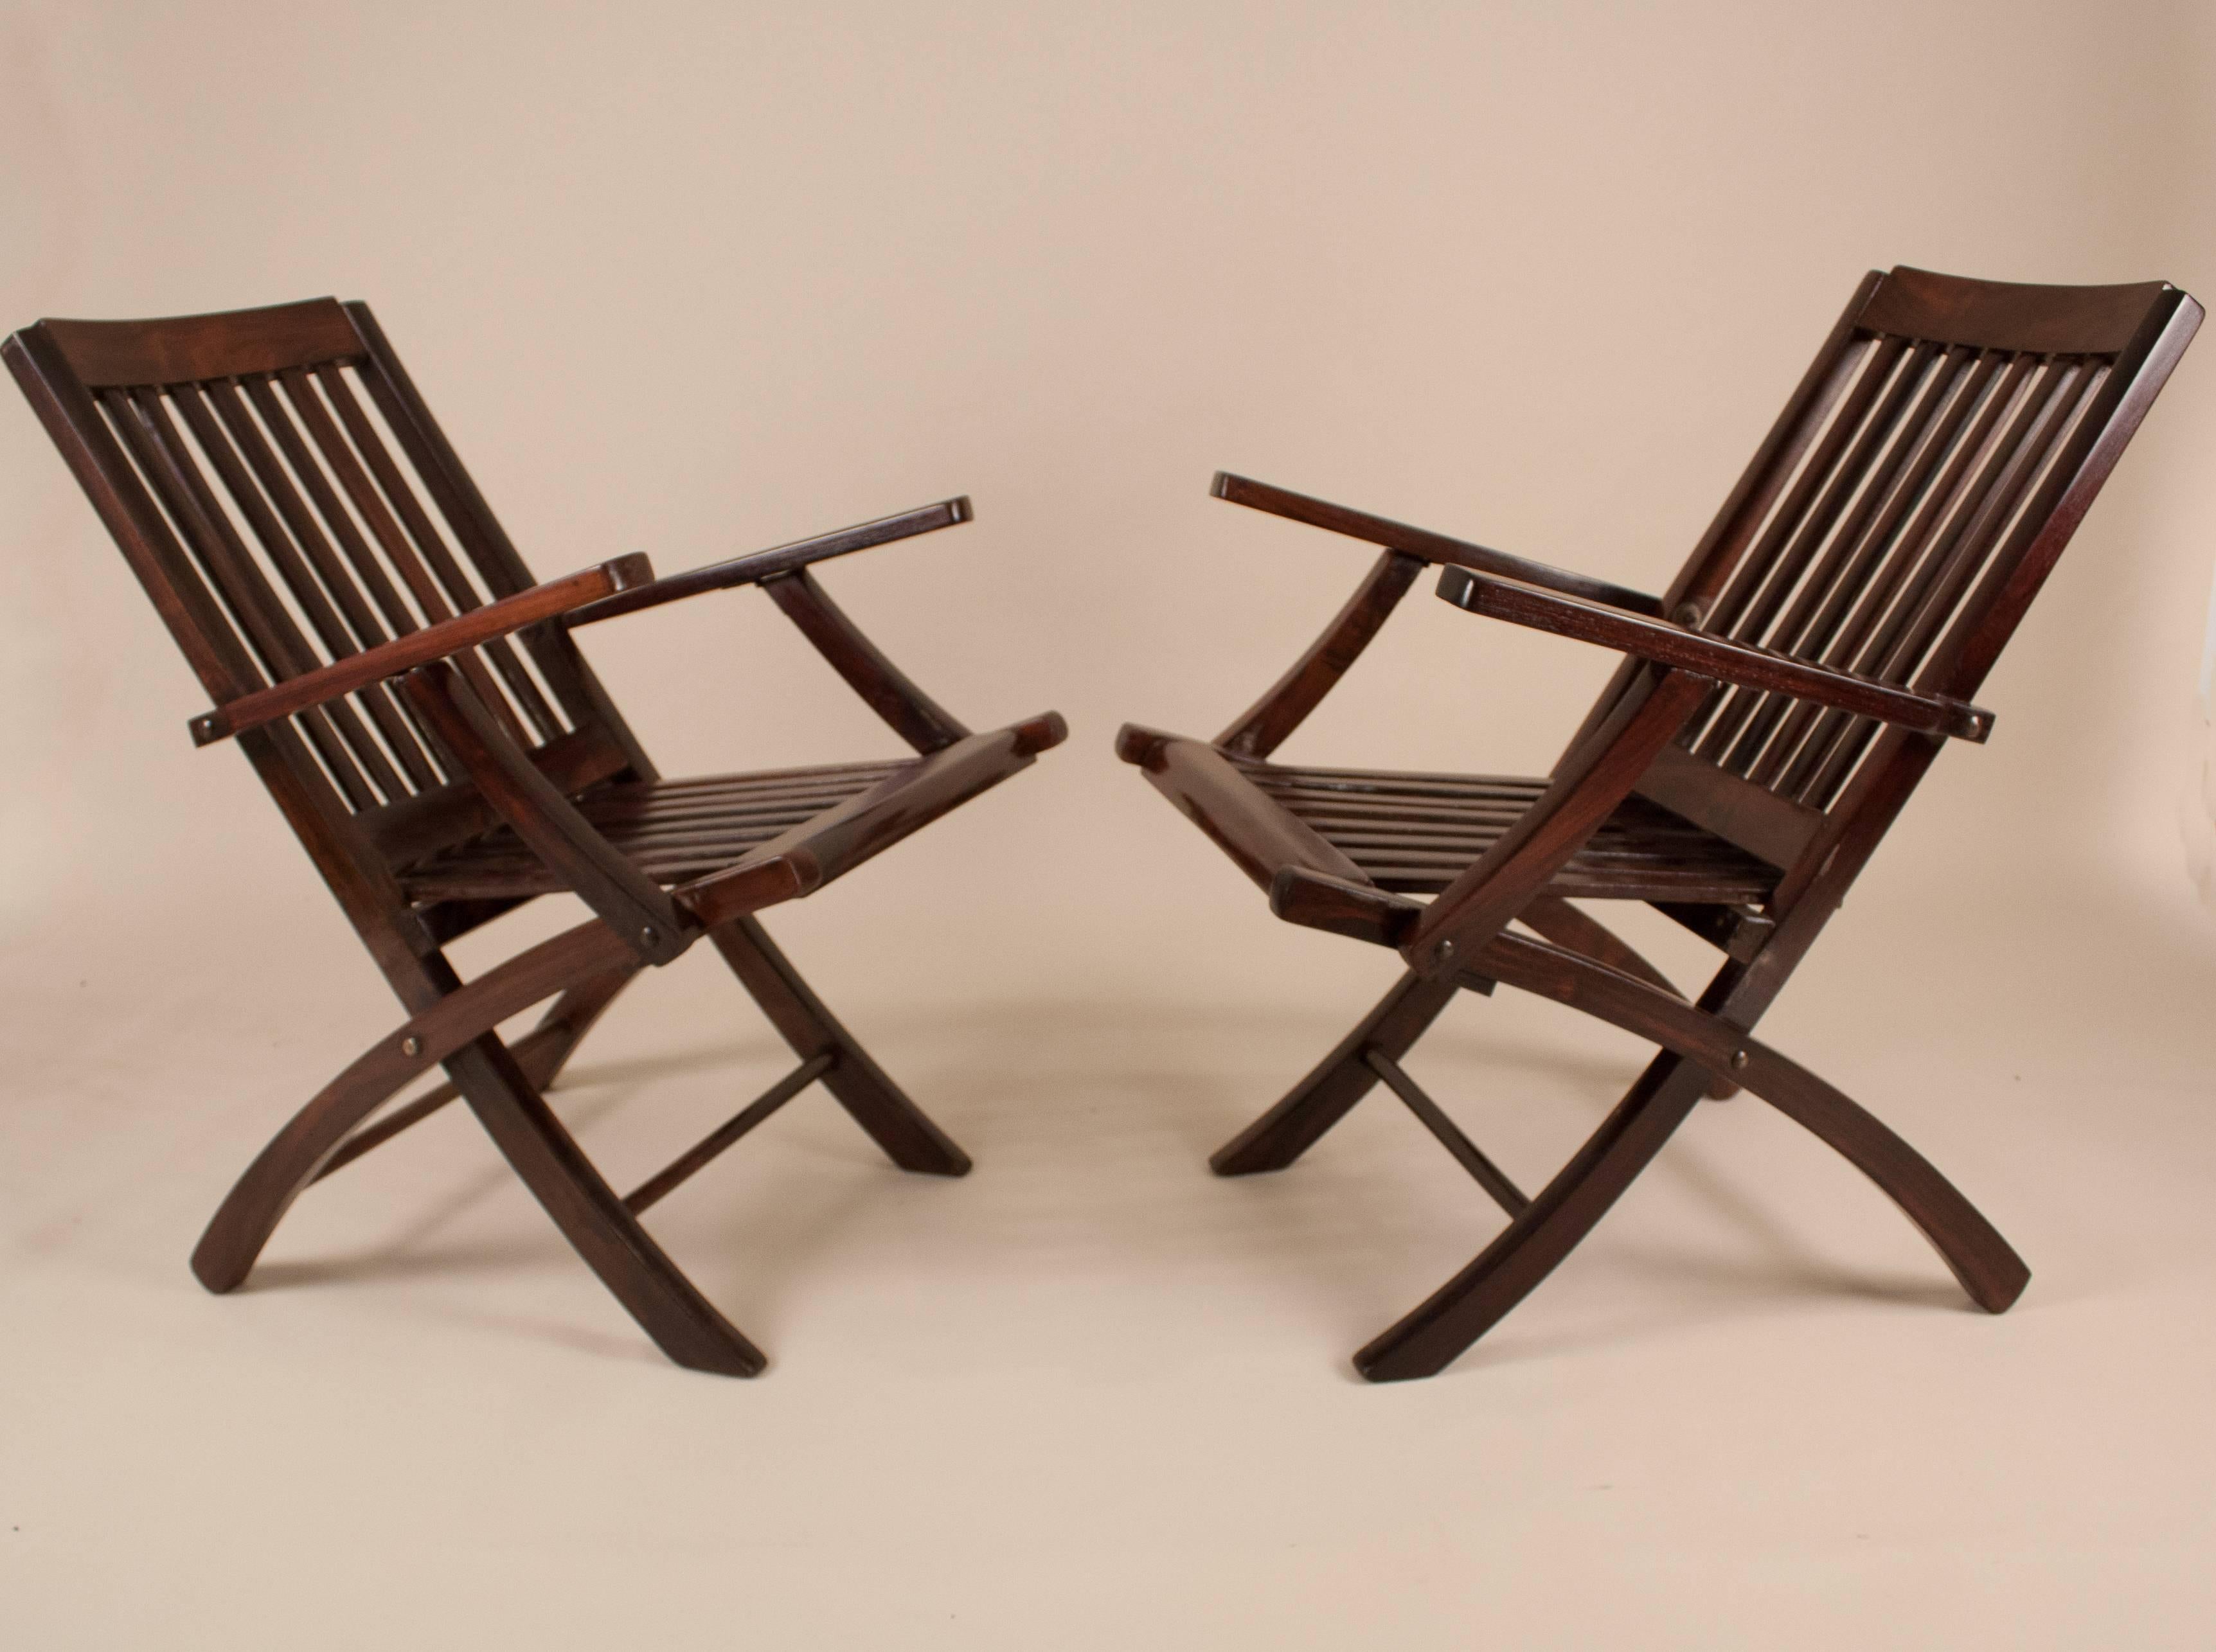 This pair of British folding steamer chairs evokes the romance of a 1940s voyage across the Indian Ocean. As stylish as they are practical, these portable deck chairs have beautiful lines and are crafted from richly refinished rosewood. The slatted